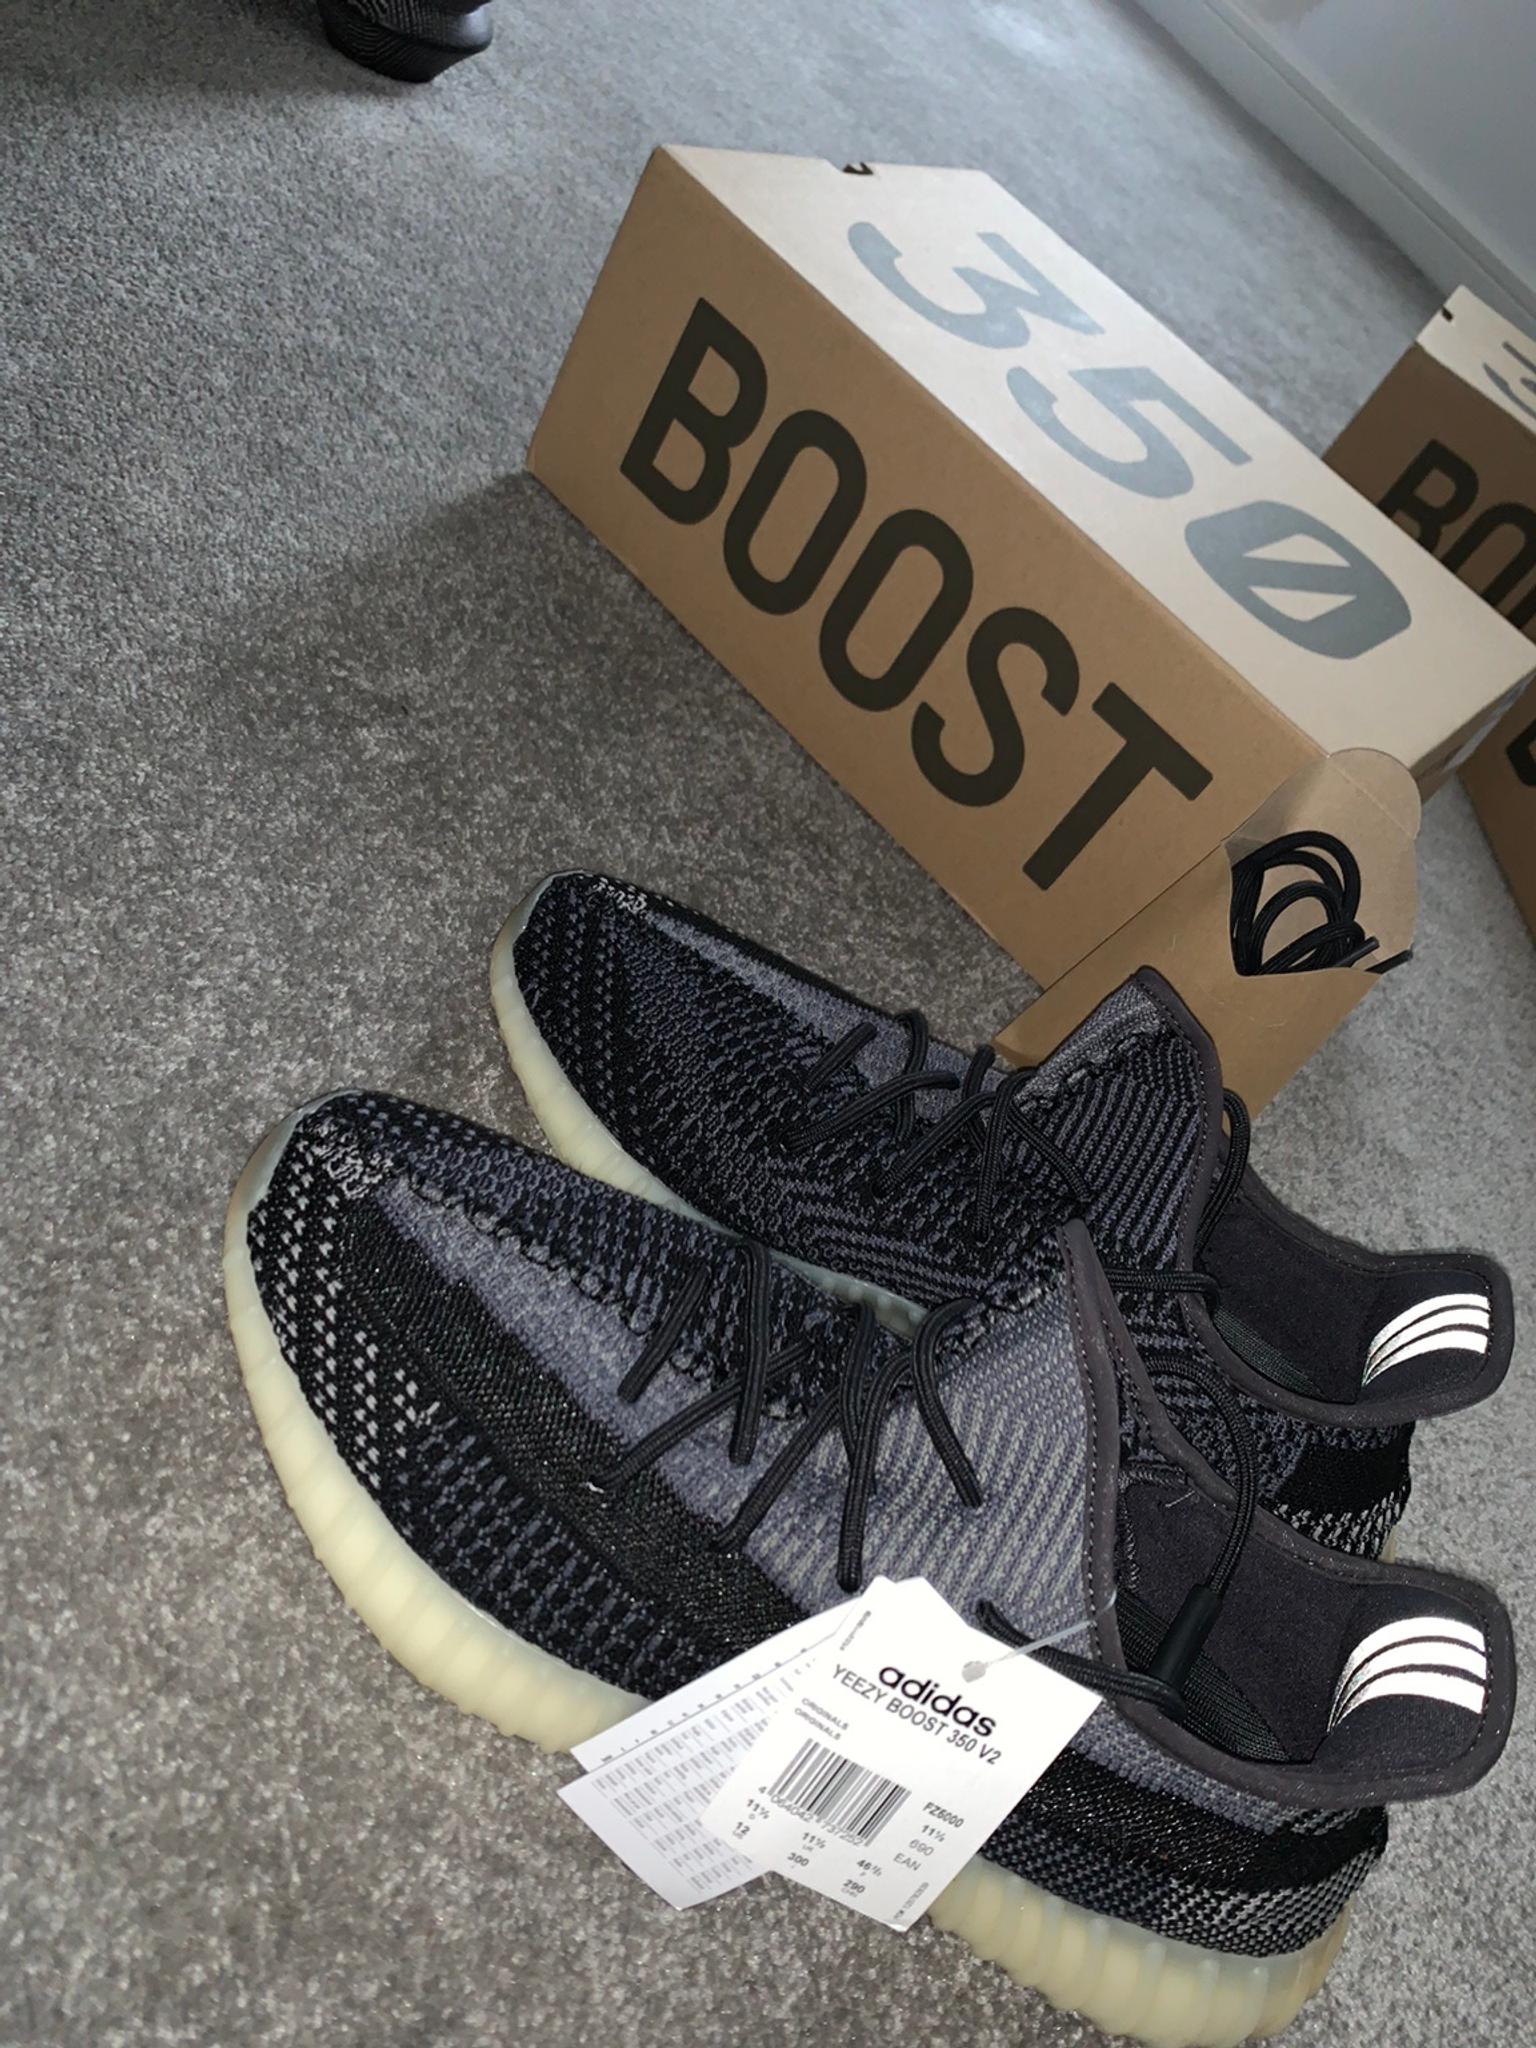 Yeezy boost 350 v2 carbon in LS20 